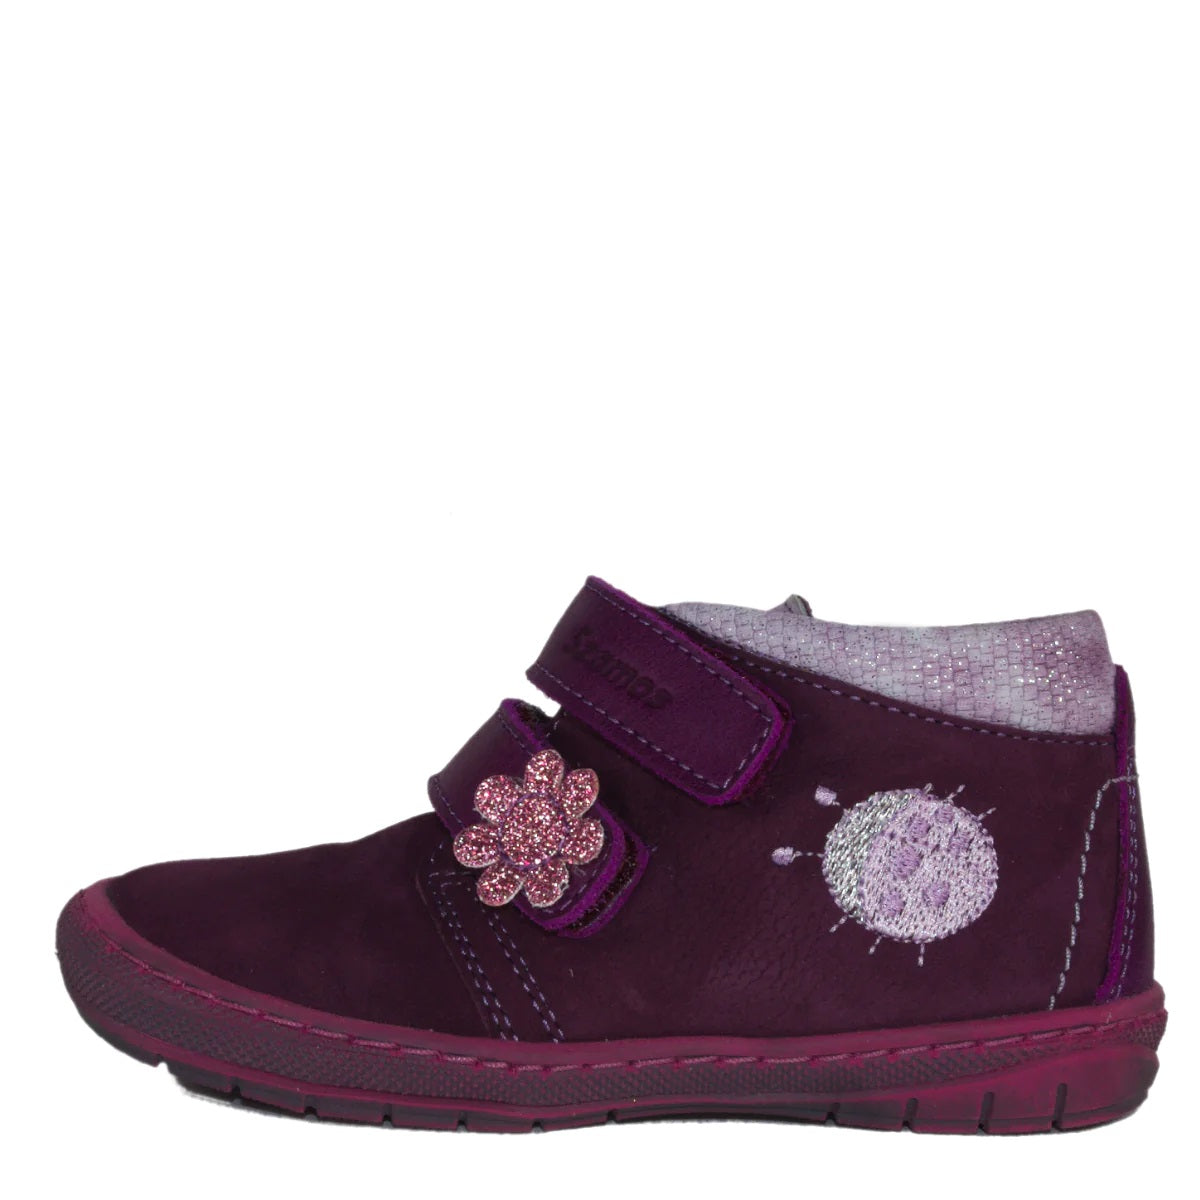 Szamos kid girl sneakers burgundy color with ladybug and flower decor and double velcro straps toddler size